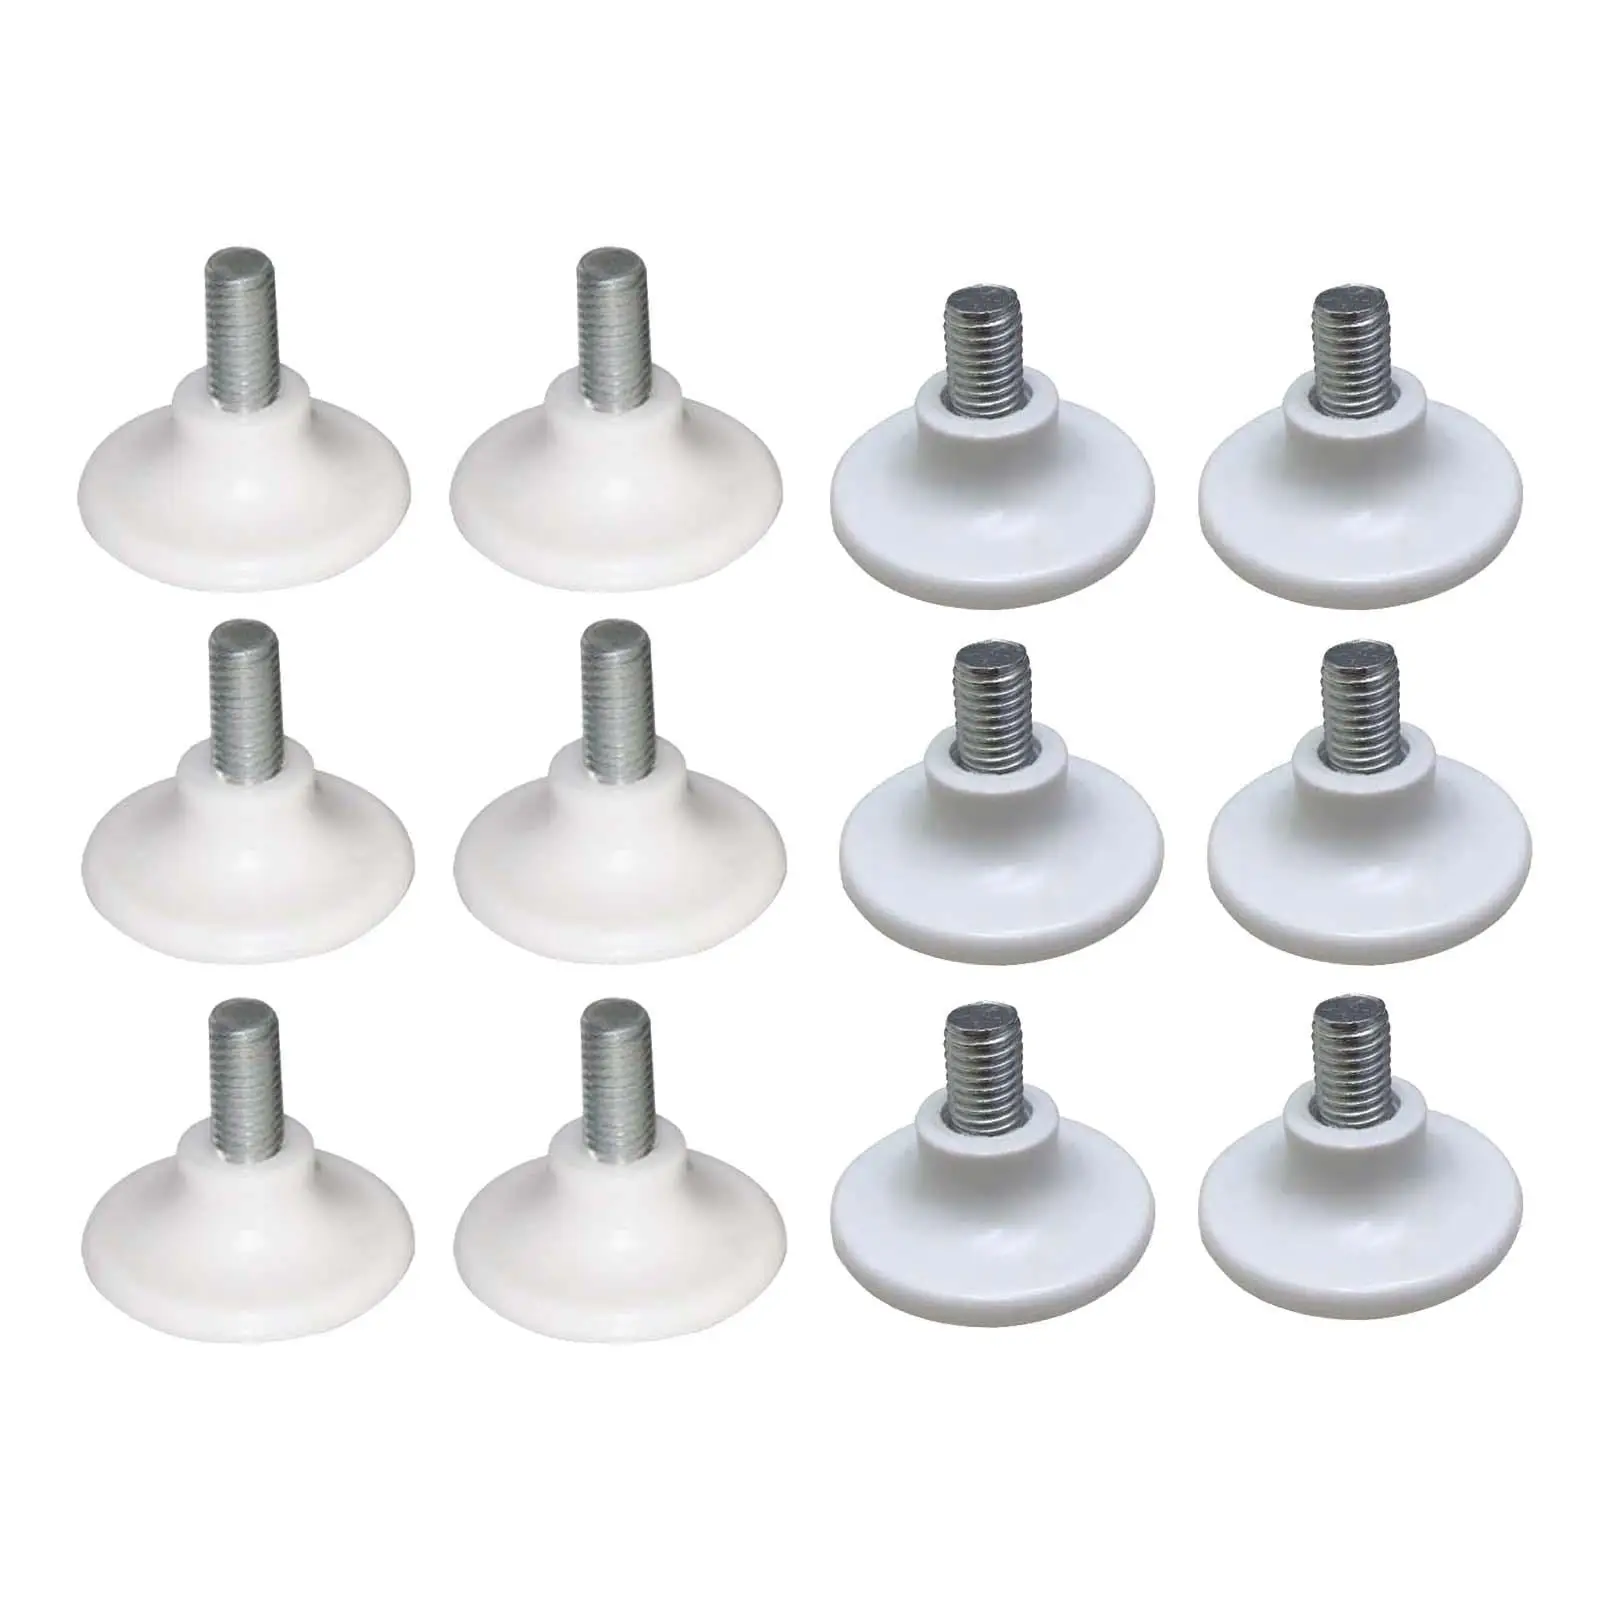 6 Pieces Furniture Levelers Table Feet Levelers for Table